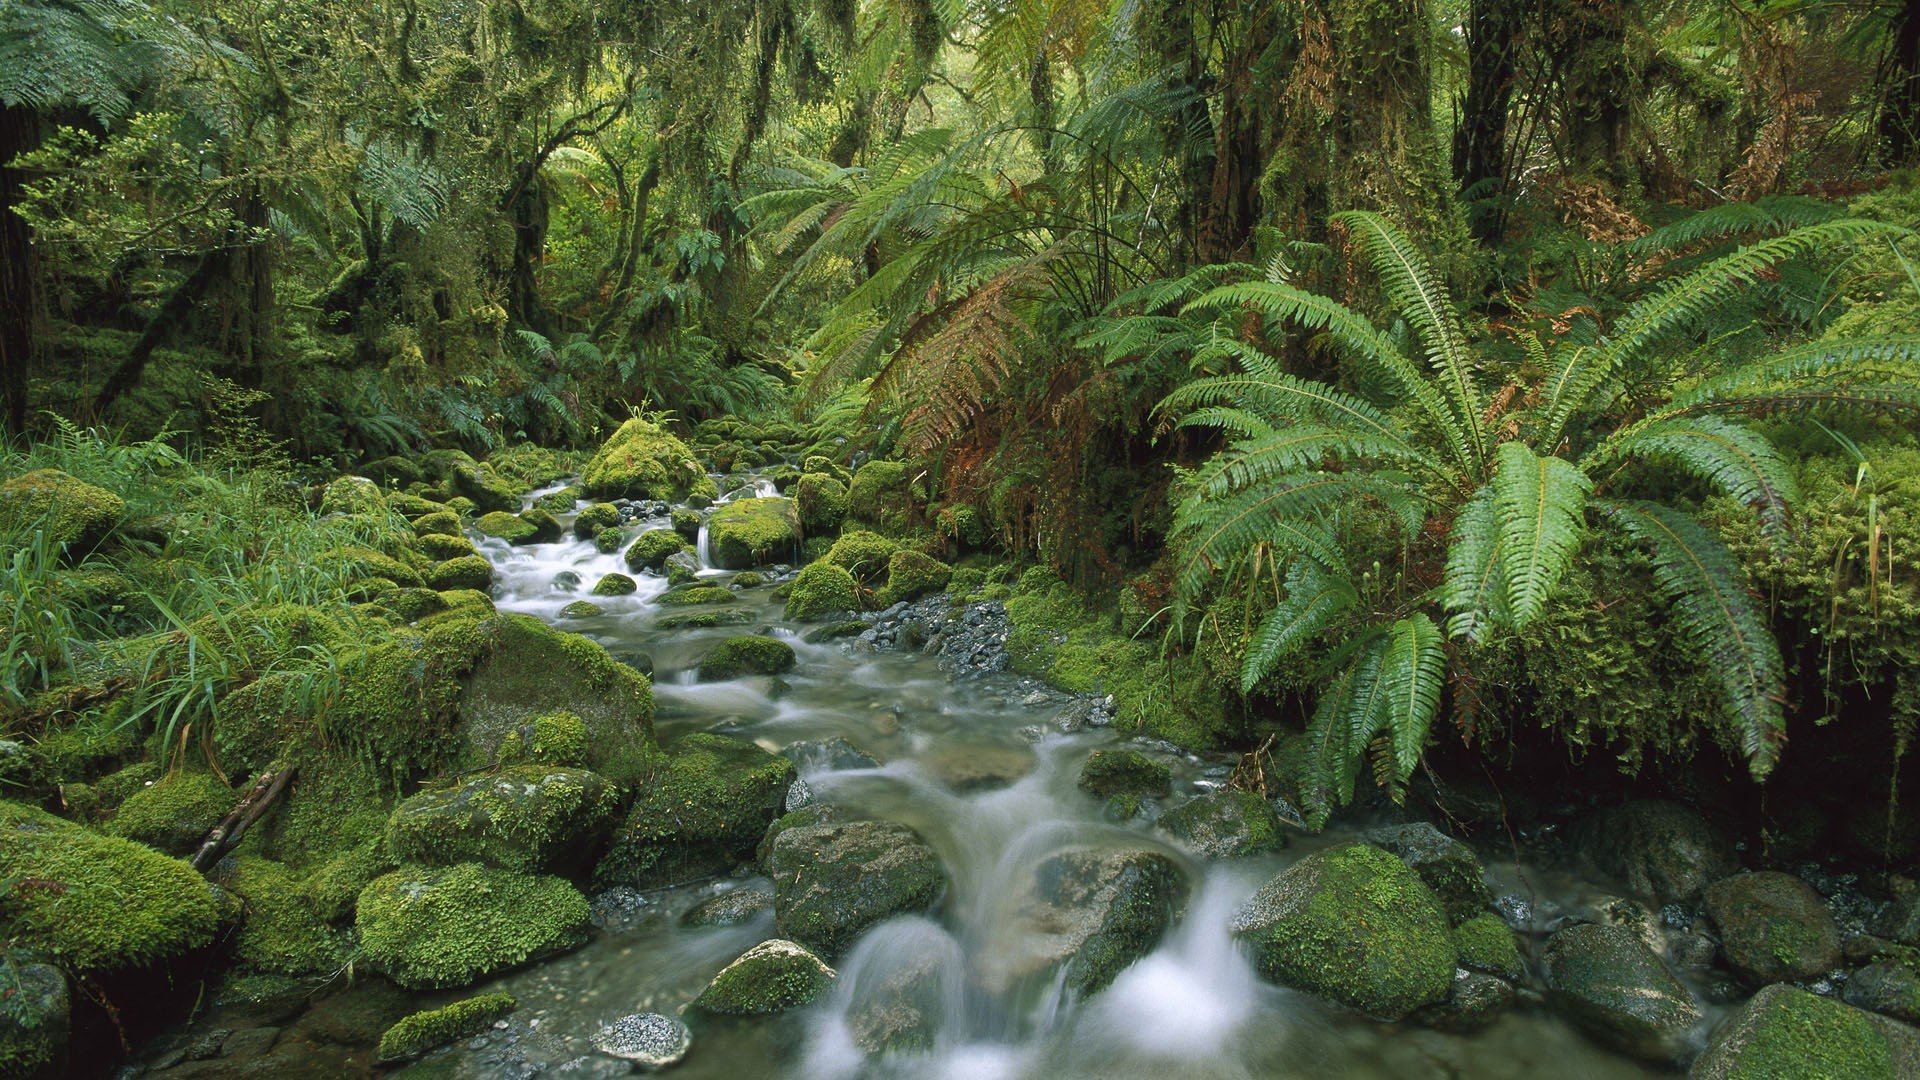 rainforest wallpapers, photos and desktop backgrounds up to 8K